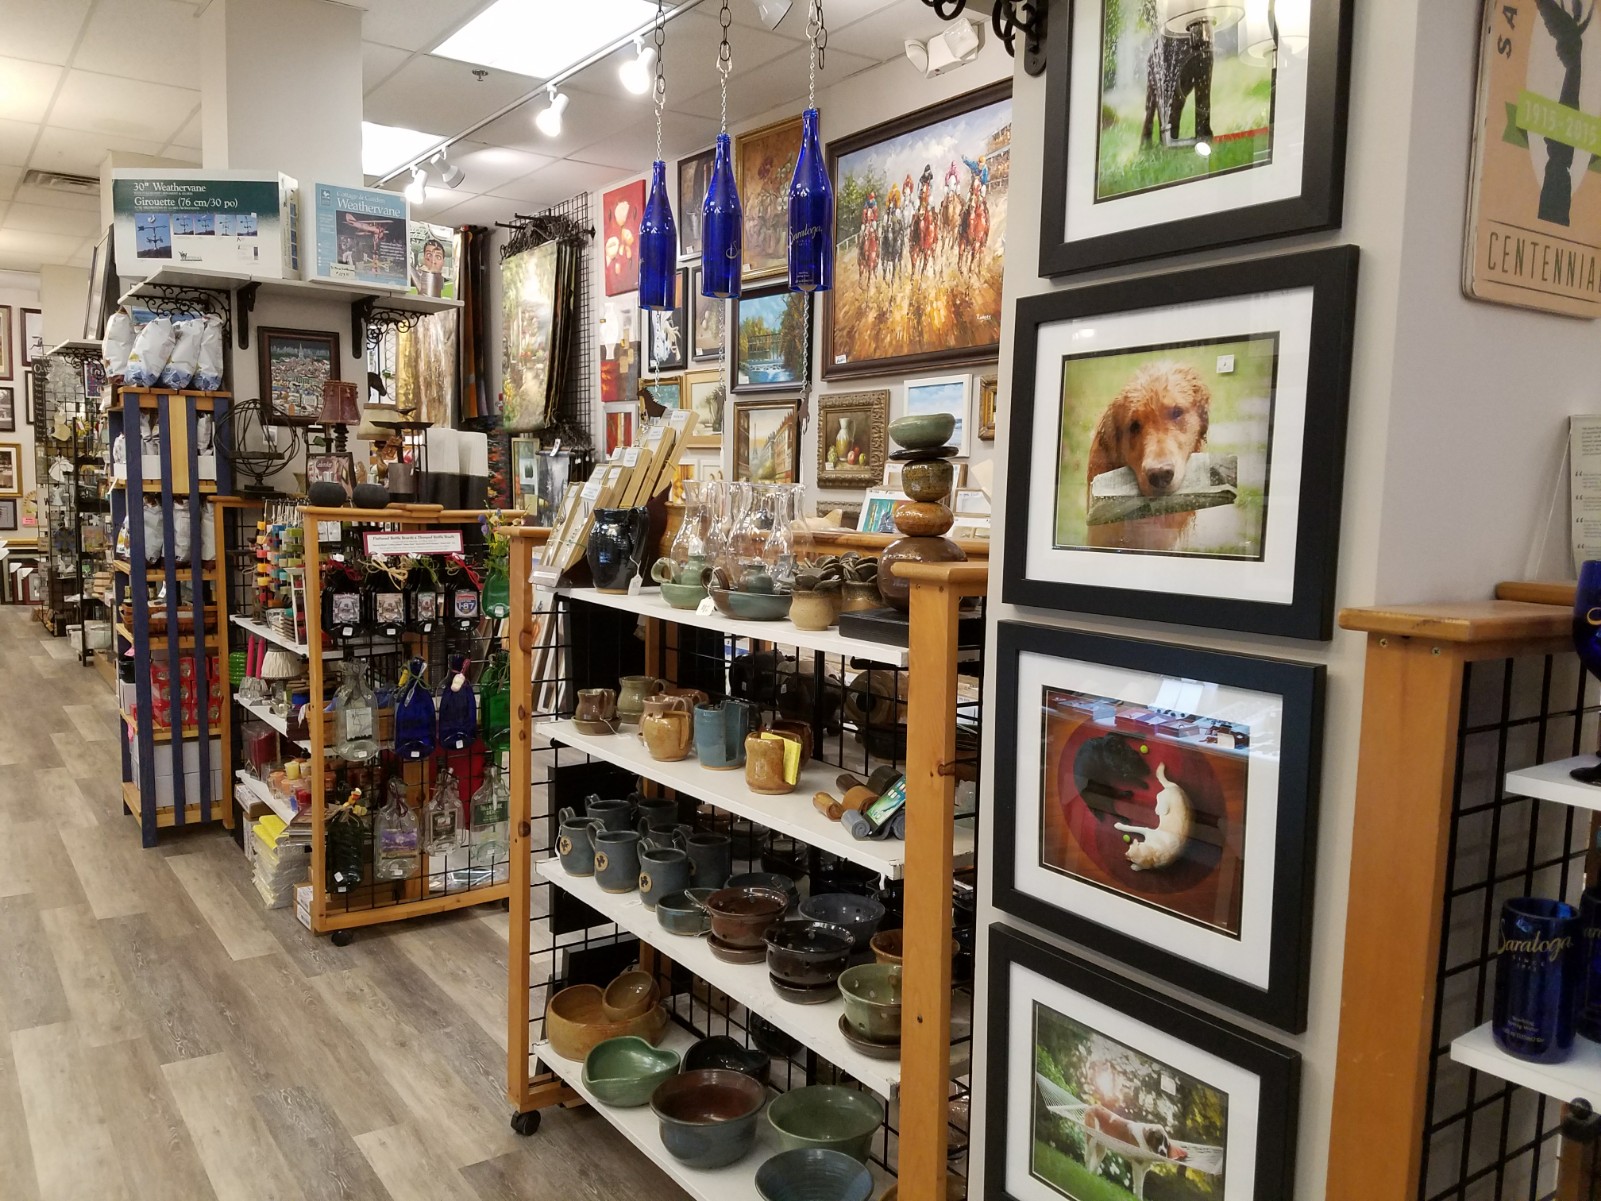 Unique Stores Near Saratoga For Fun Gifts & Great Shopping Finds